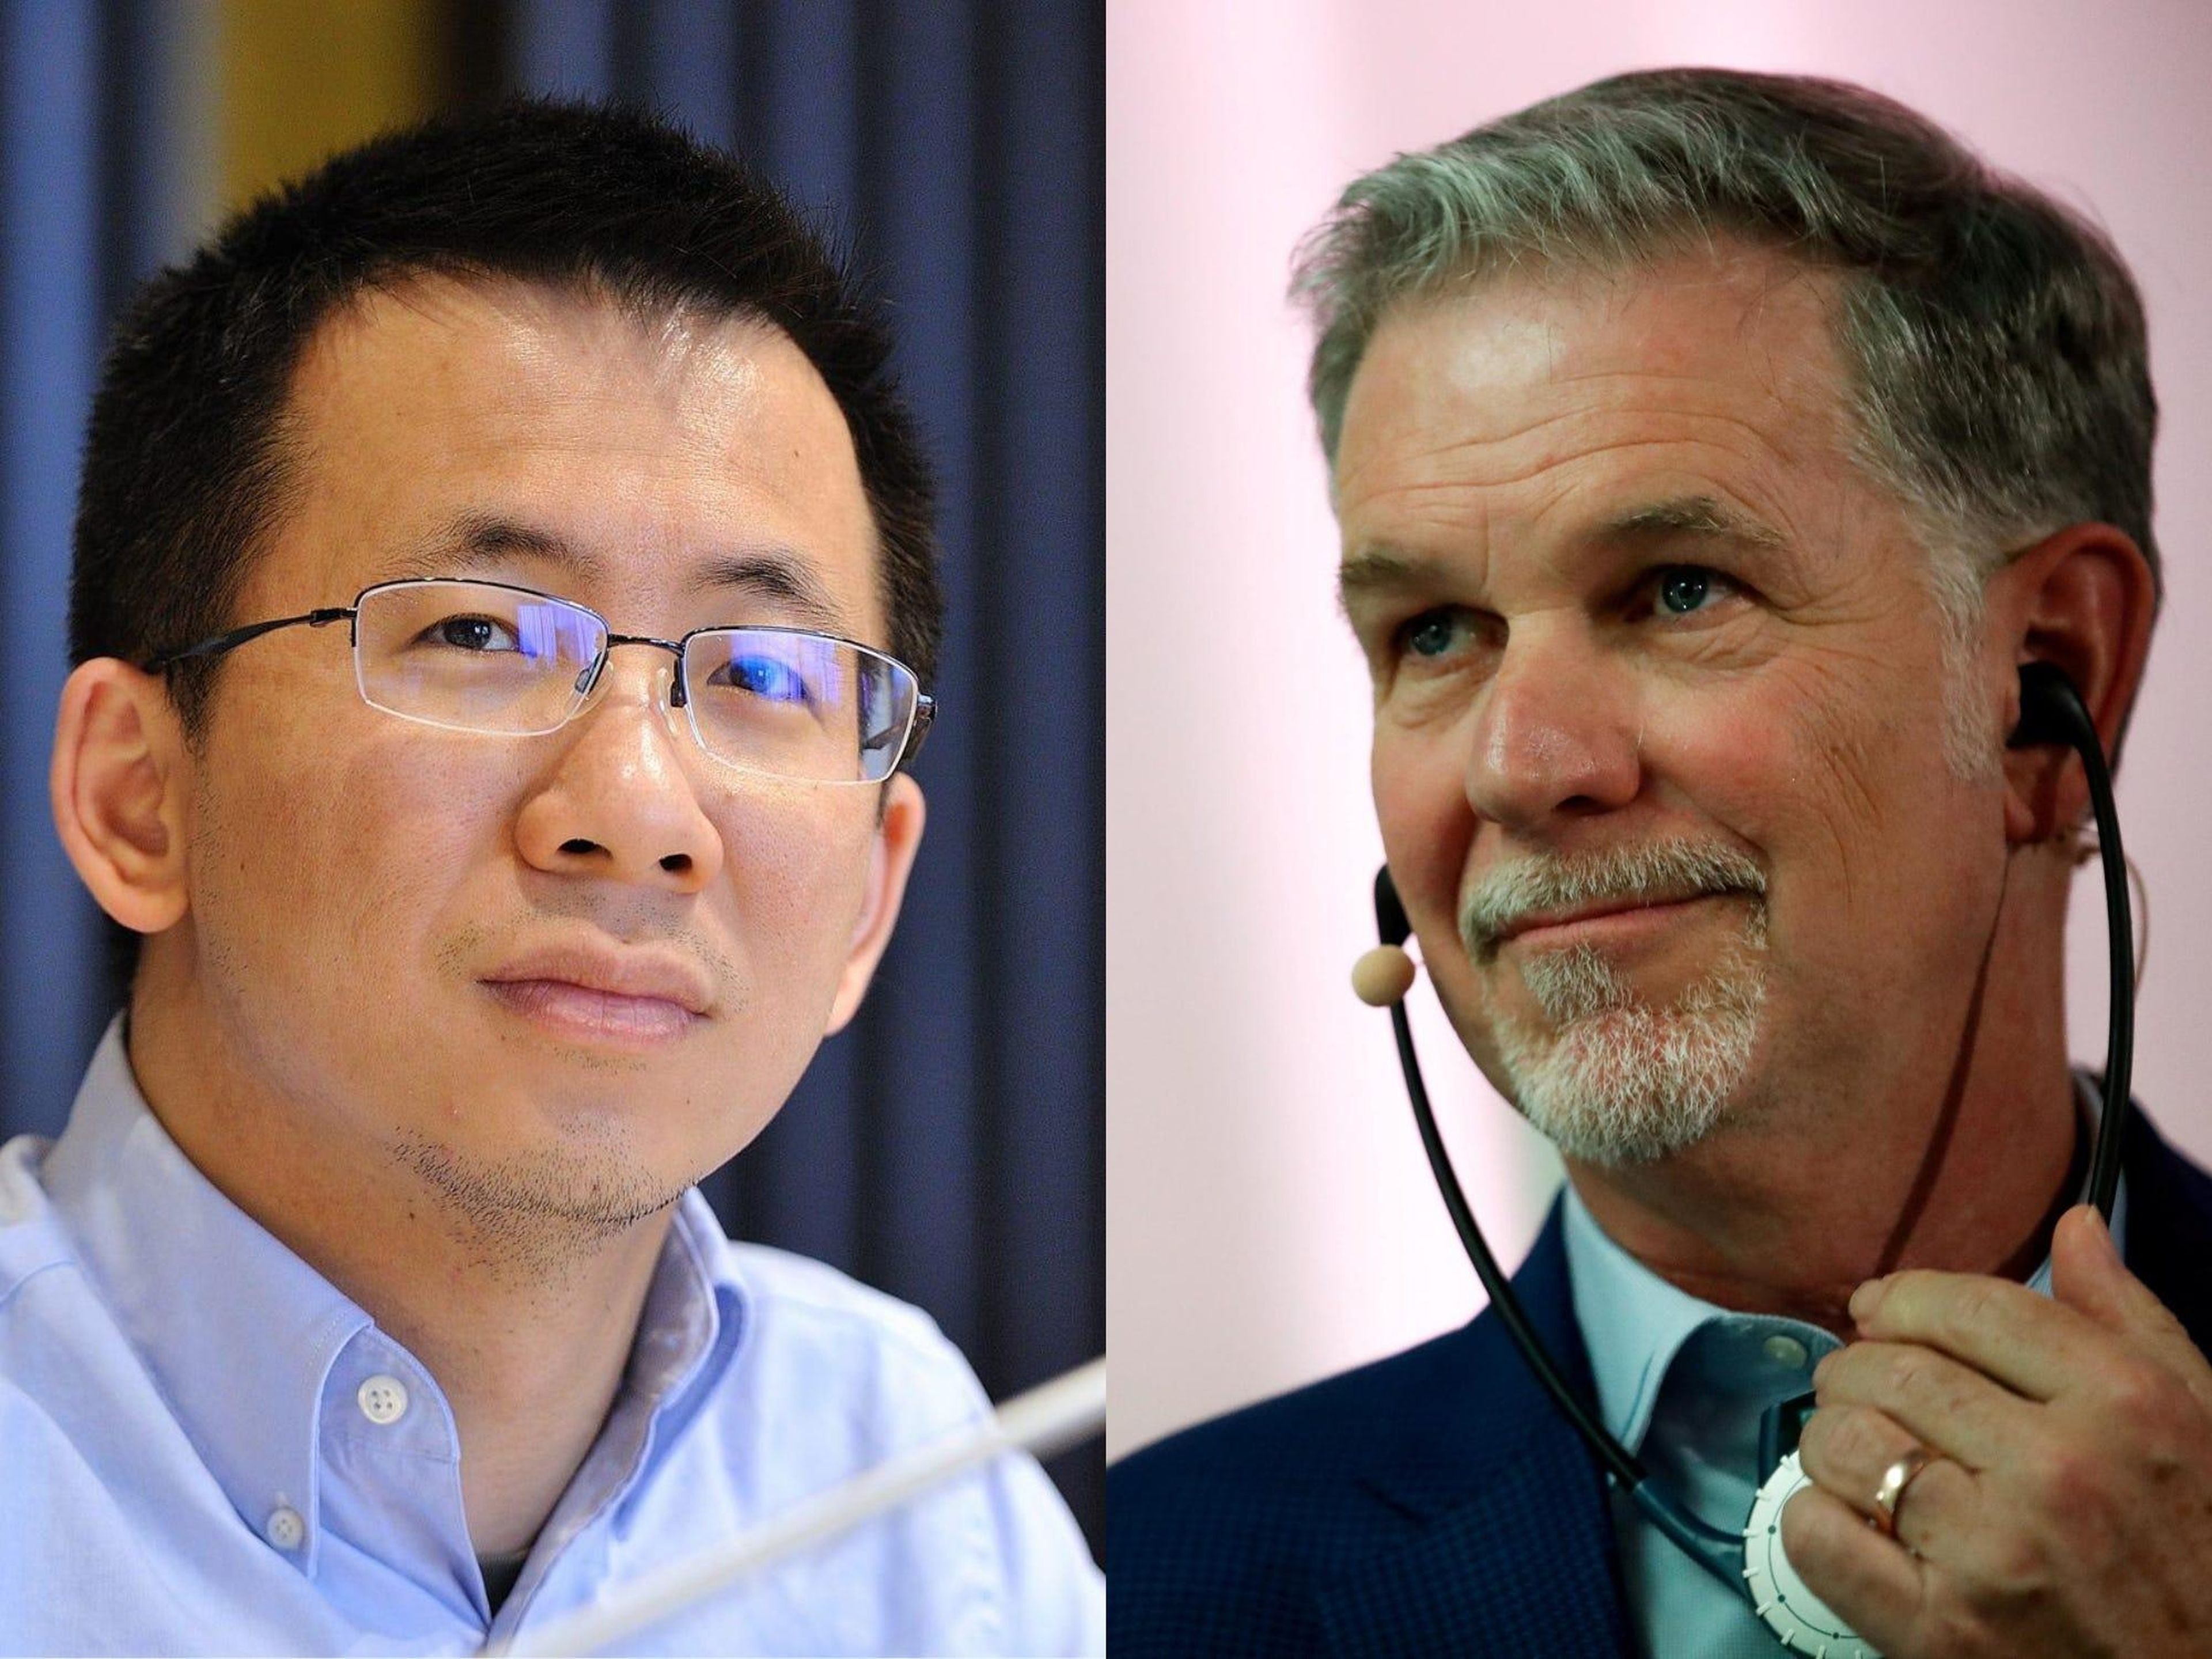 ByteDance cofounder & CEO Zhang Yiming, left; and Netflix CEO Reed Hastings. VCG/VCG via Getty Images; Reuters/Gonzalo Fuentes/File Photo